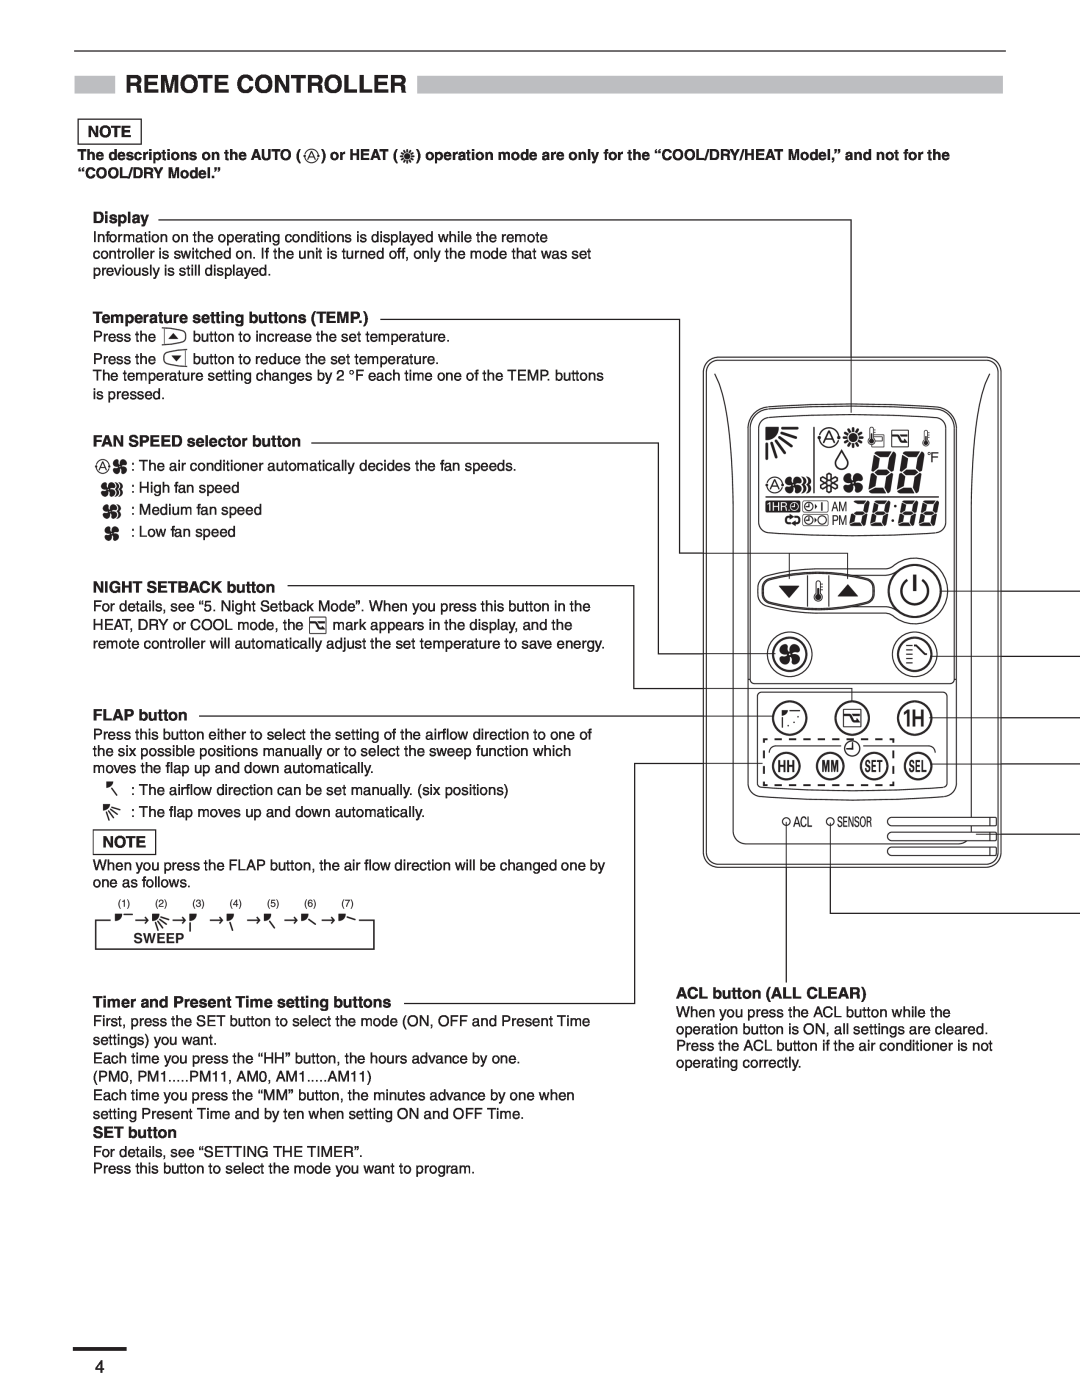 Panasonic CZ-RD515U Remote Controller, Display, Temperature setting buttons TEMP, FAN SPEED selector button, FLAP button 